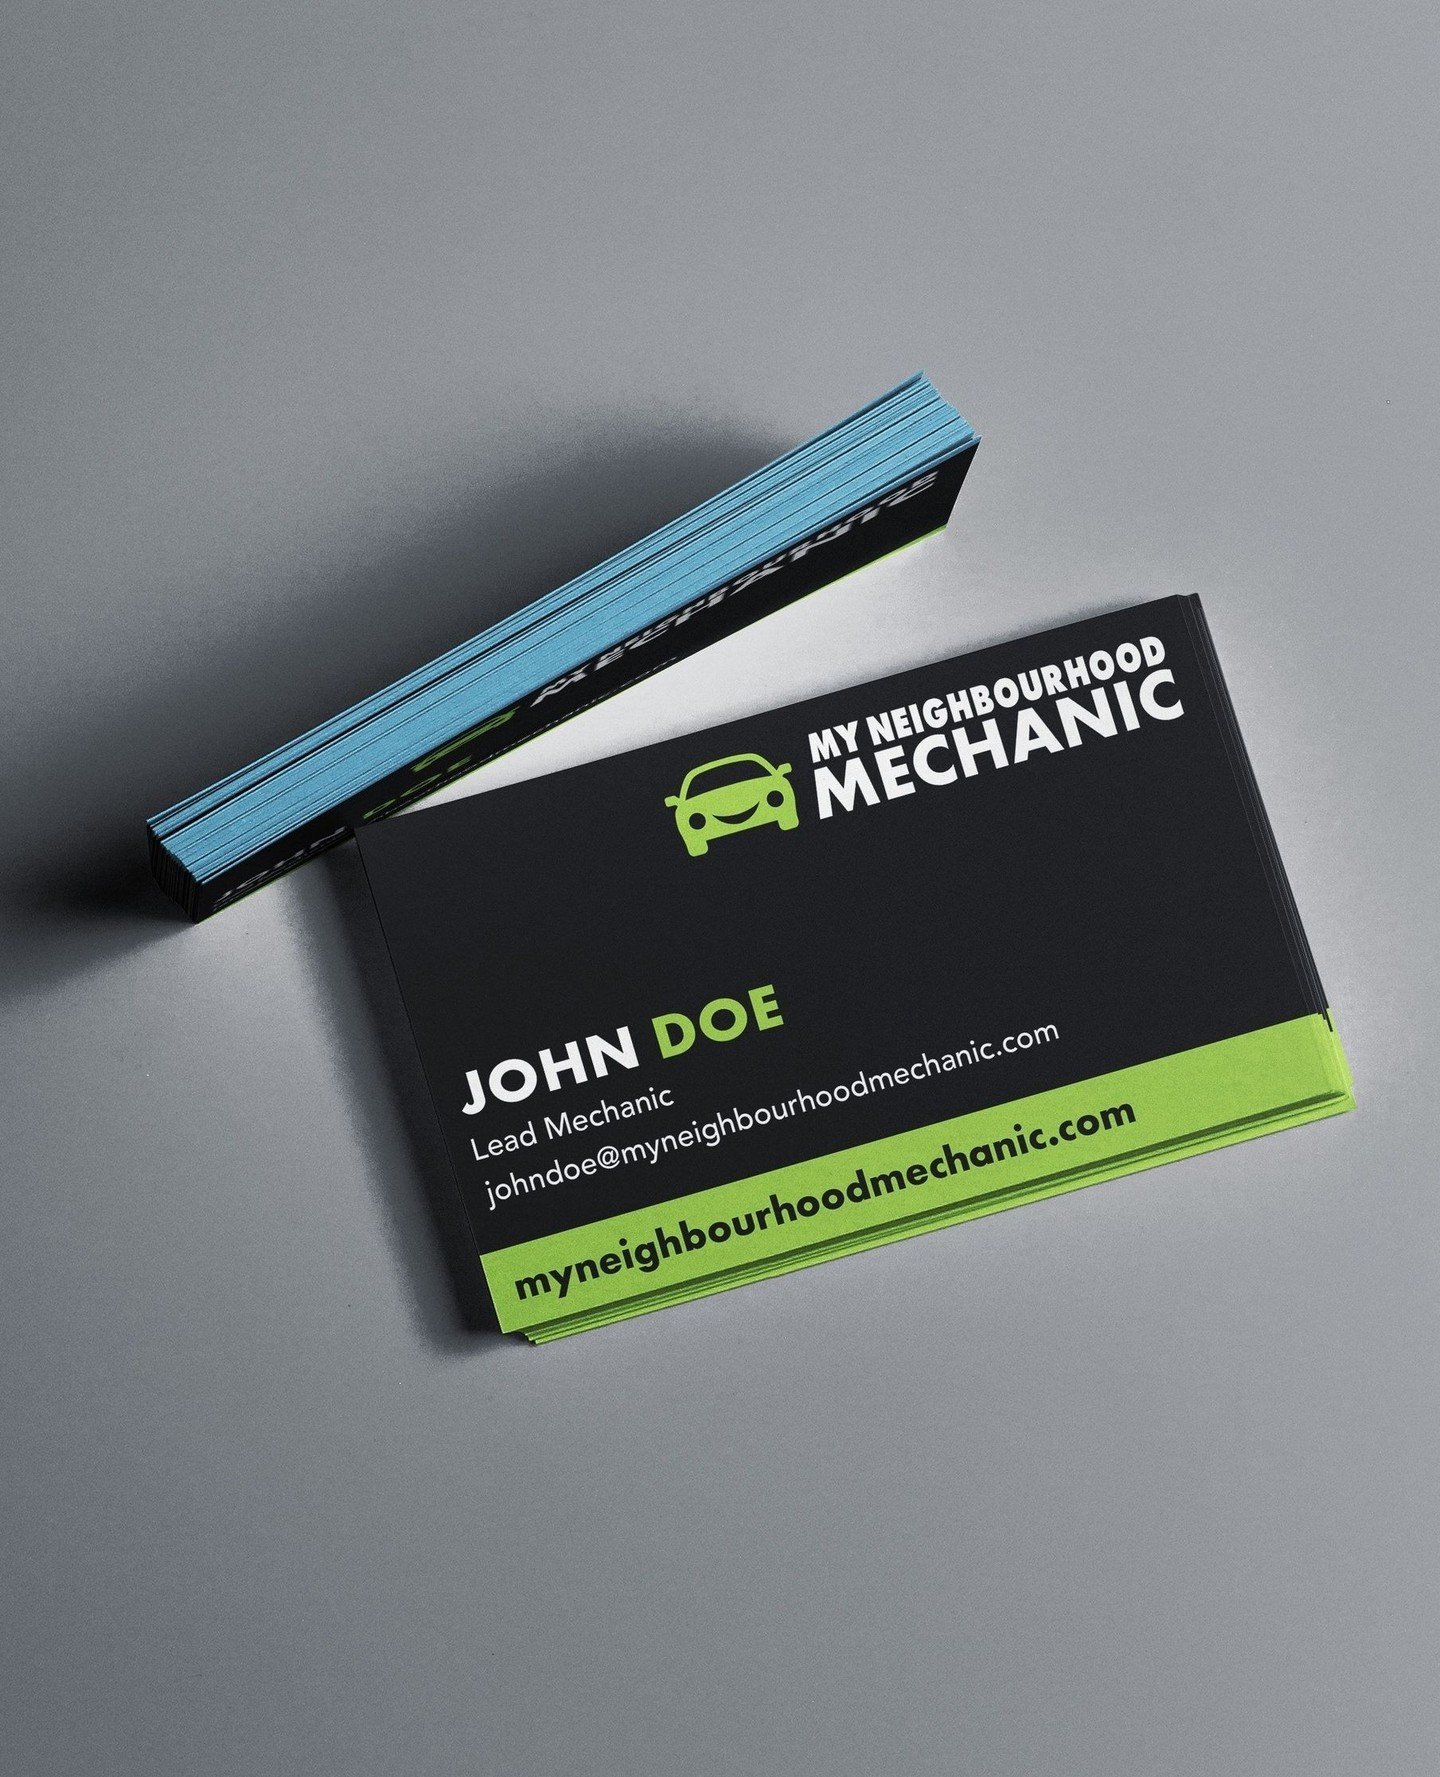 Leave a lasting impression with our sleek and professional business card designs.